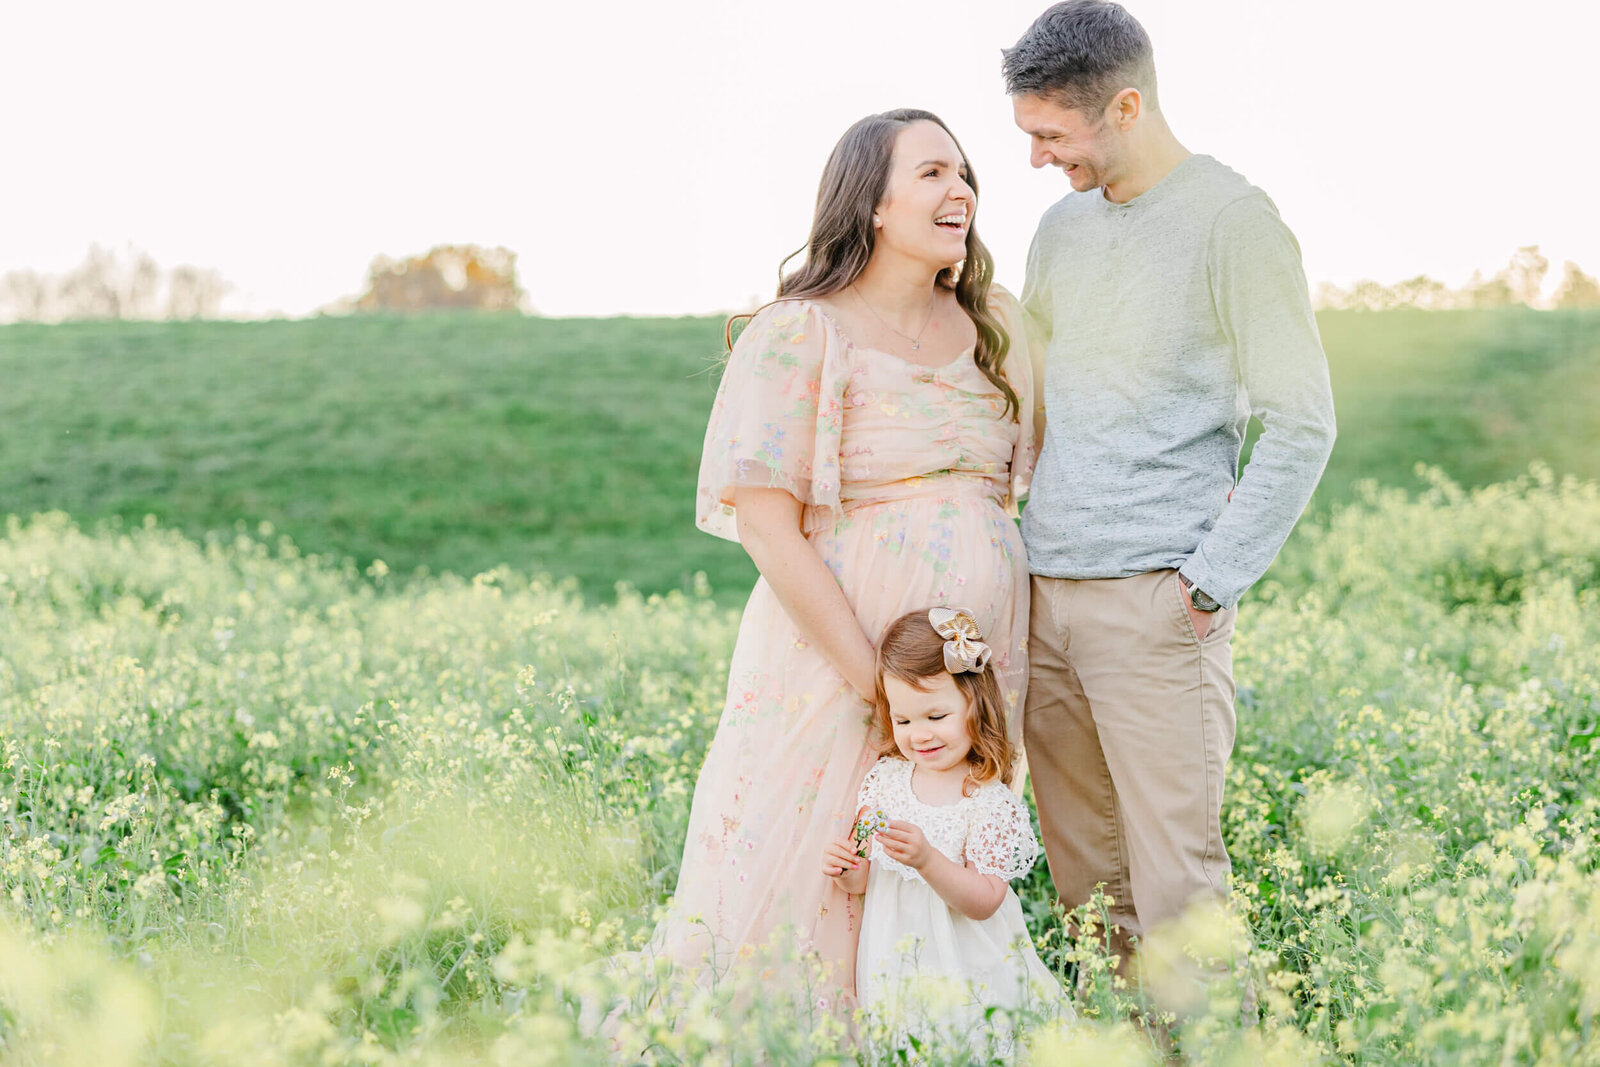 Pregnant woman, her husband, and her daughter laugh together in a field of yellow wildflowers